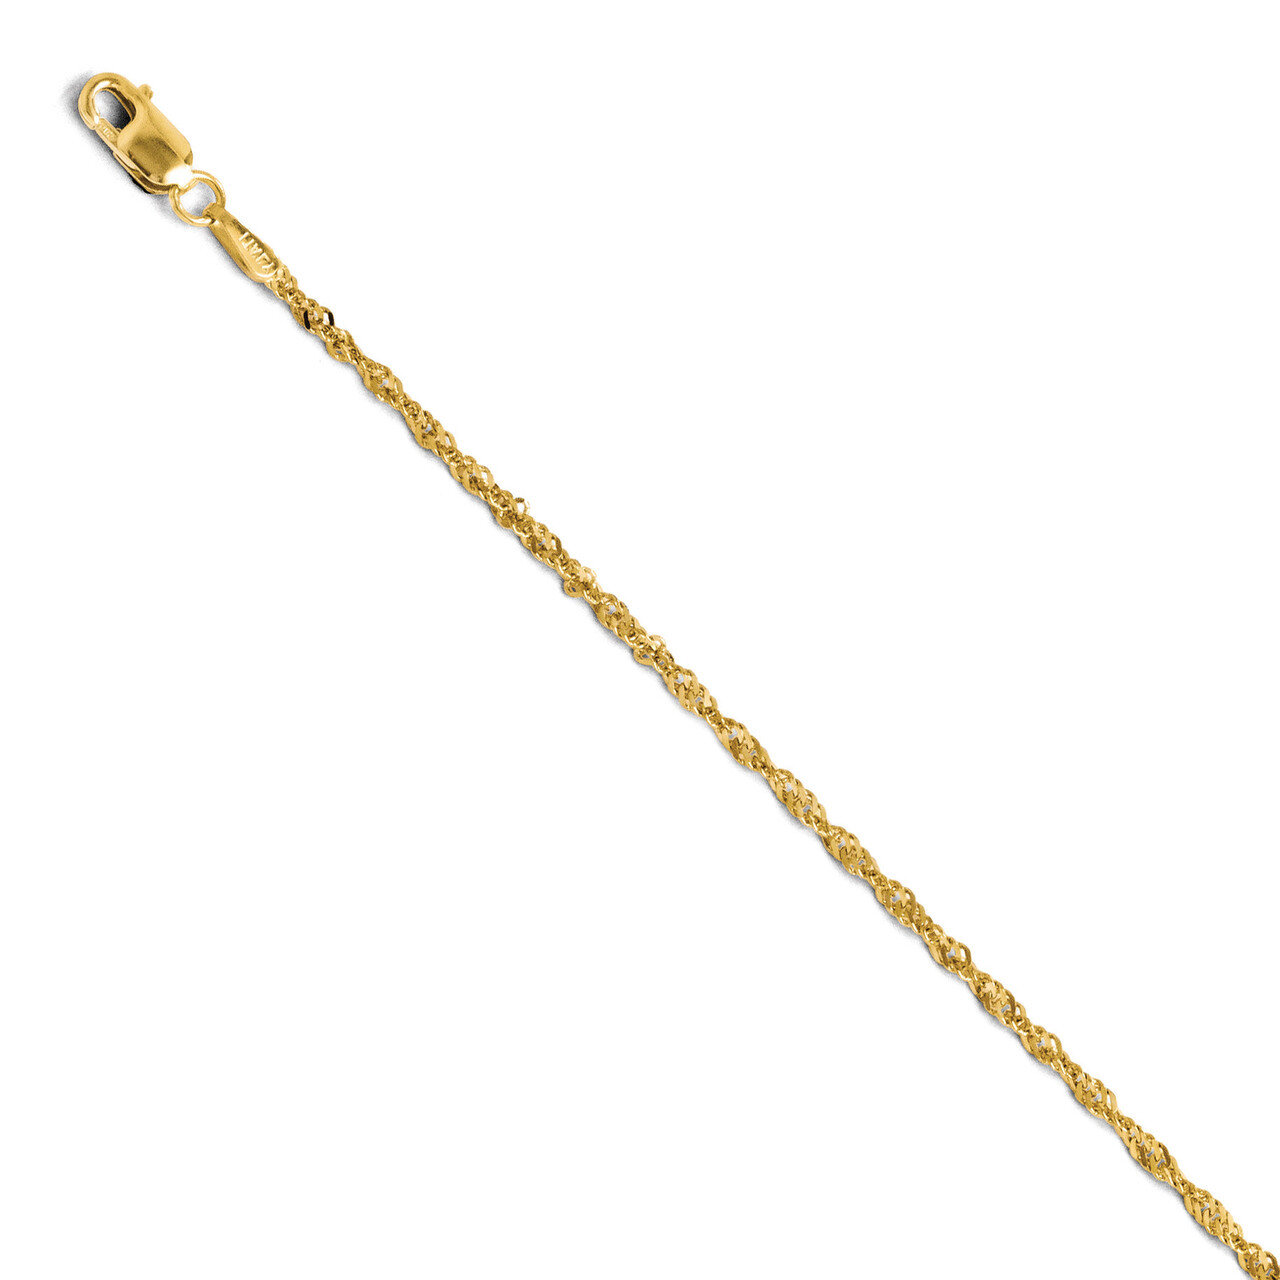 Singapore Chain 10 Inch - 14k Gold HB-668-10